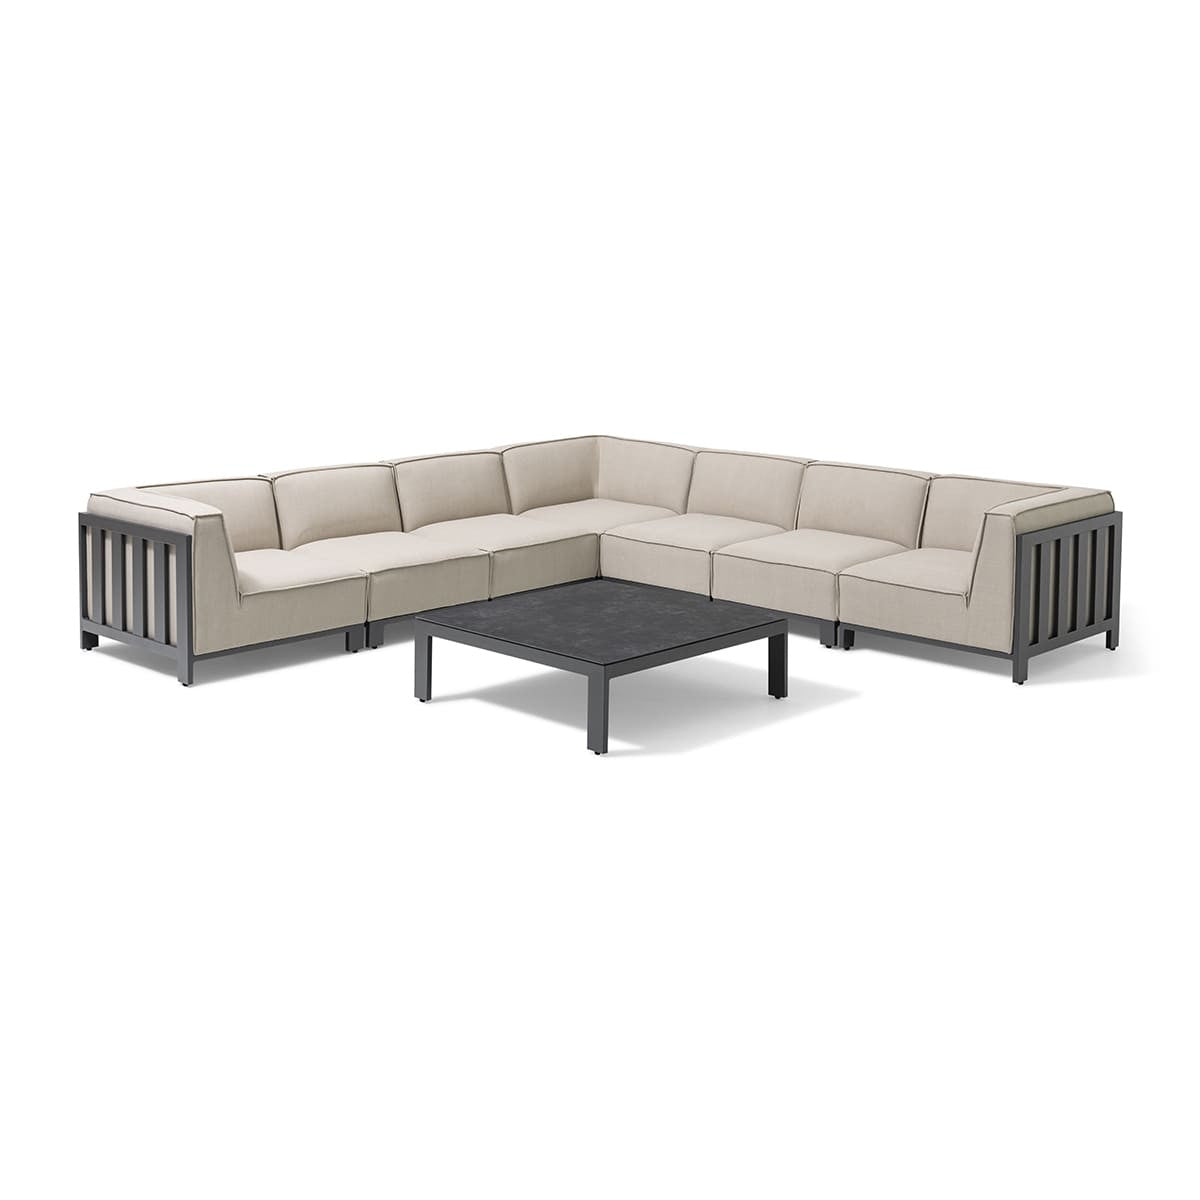 Maze Ibiza Large Corner Sofa Set With Square Coffee Table White Background-Better Bed Company